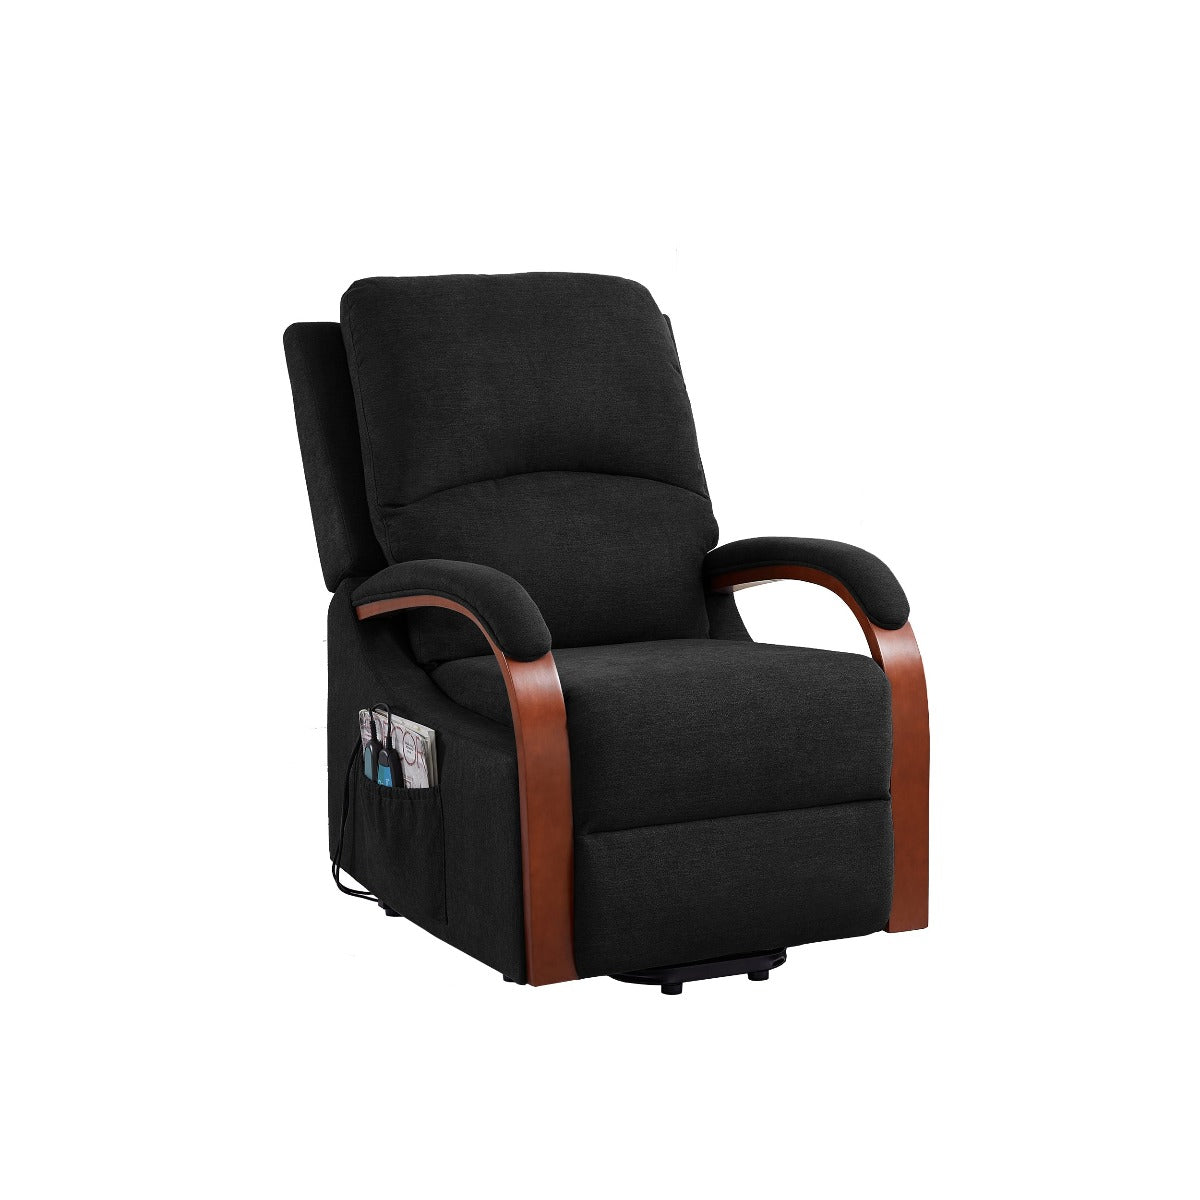 Power Lift Recliner Message Chair Soft Charcoal colored Fabric front view no background